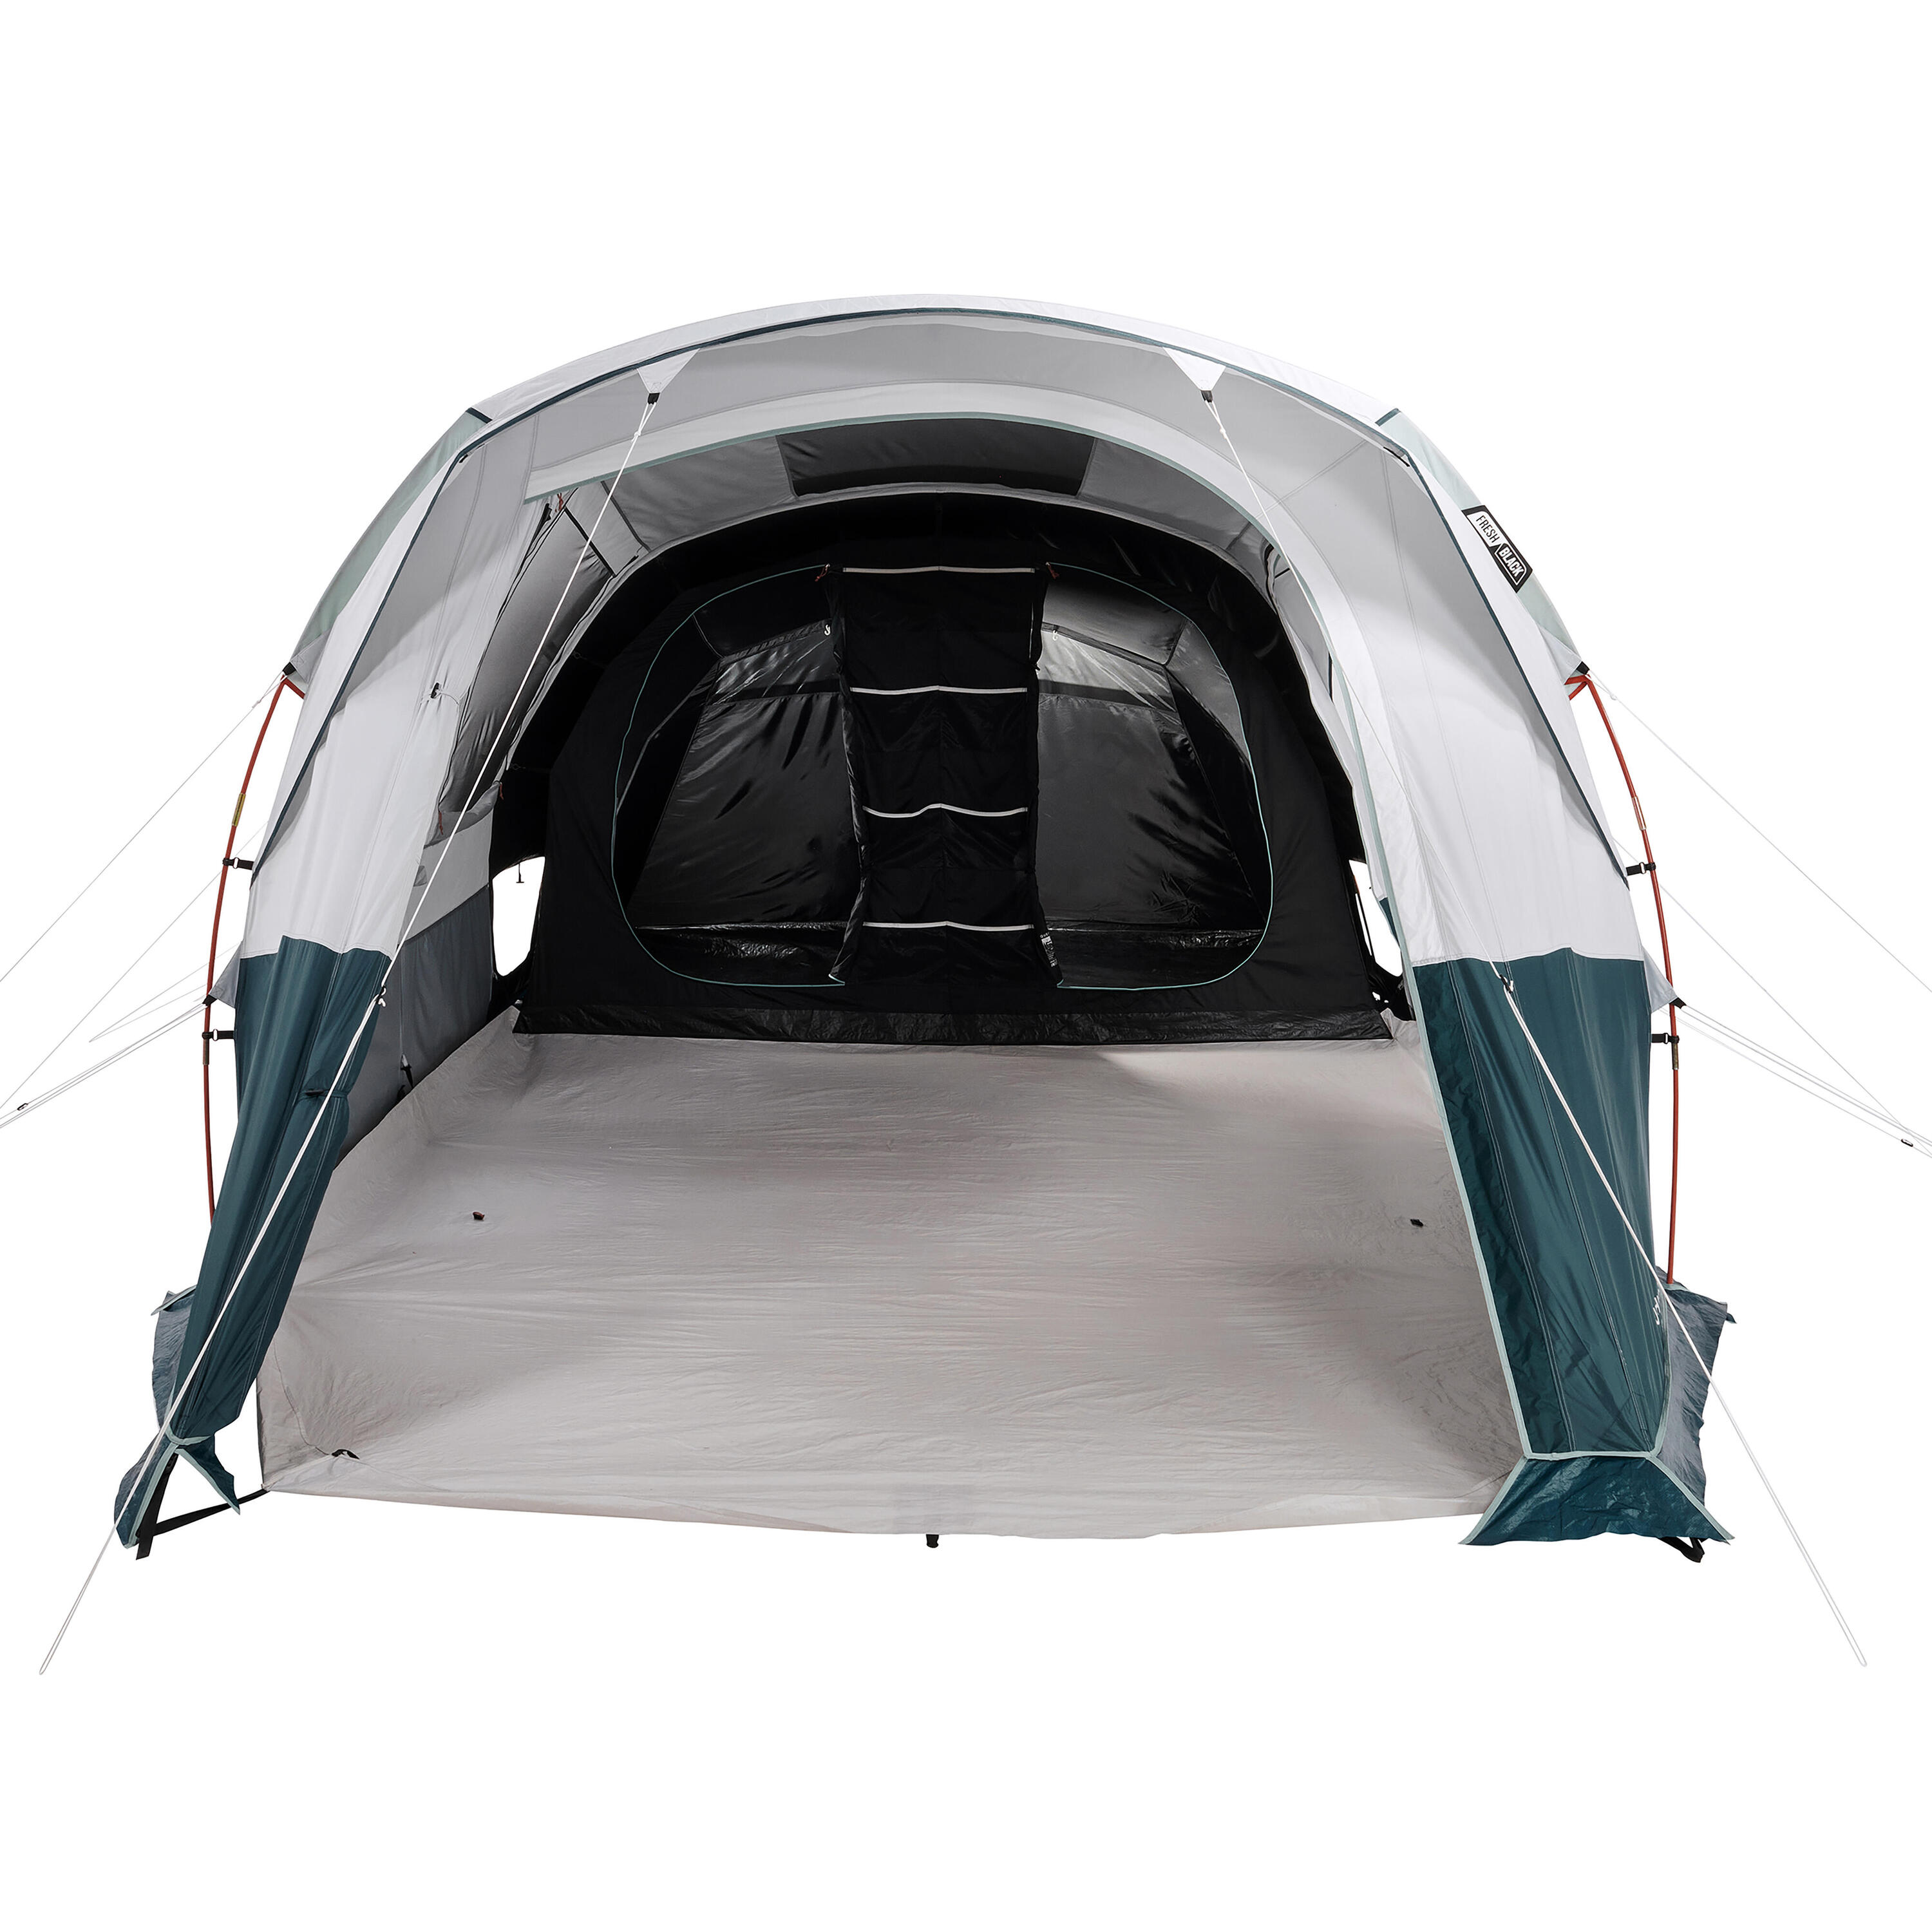 Camping tent with poles - Arpenaz 6.3 F&B - 6 Person - 3 Bedrooms 18/35